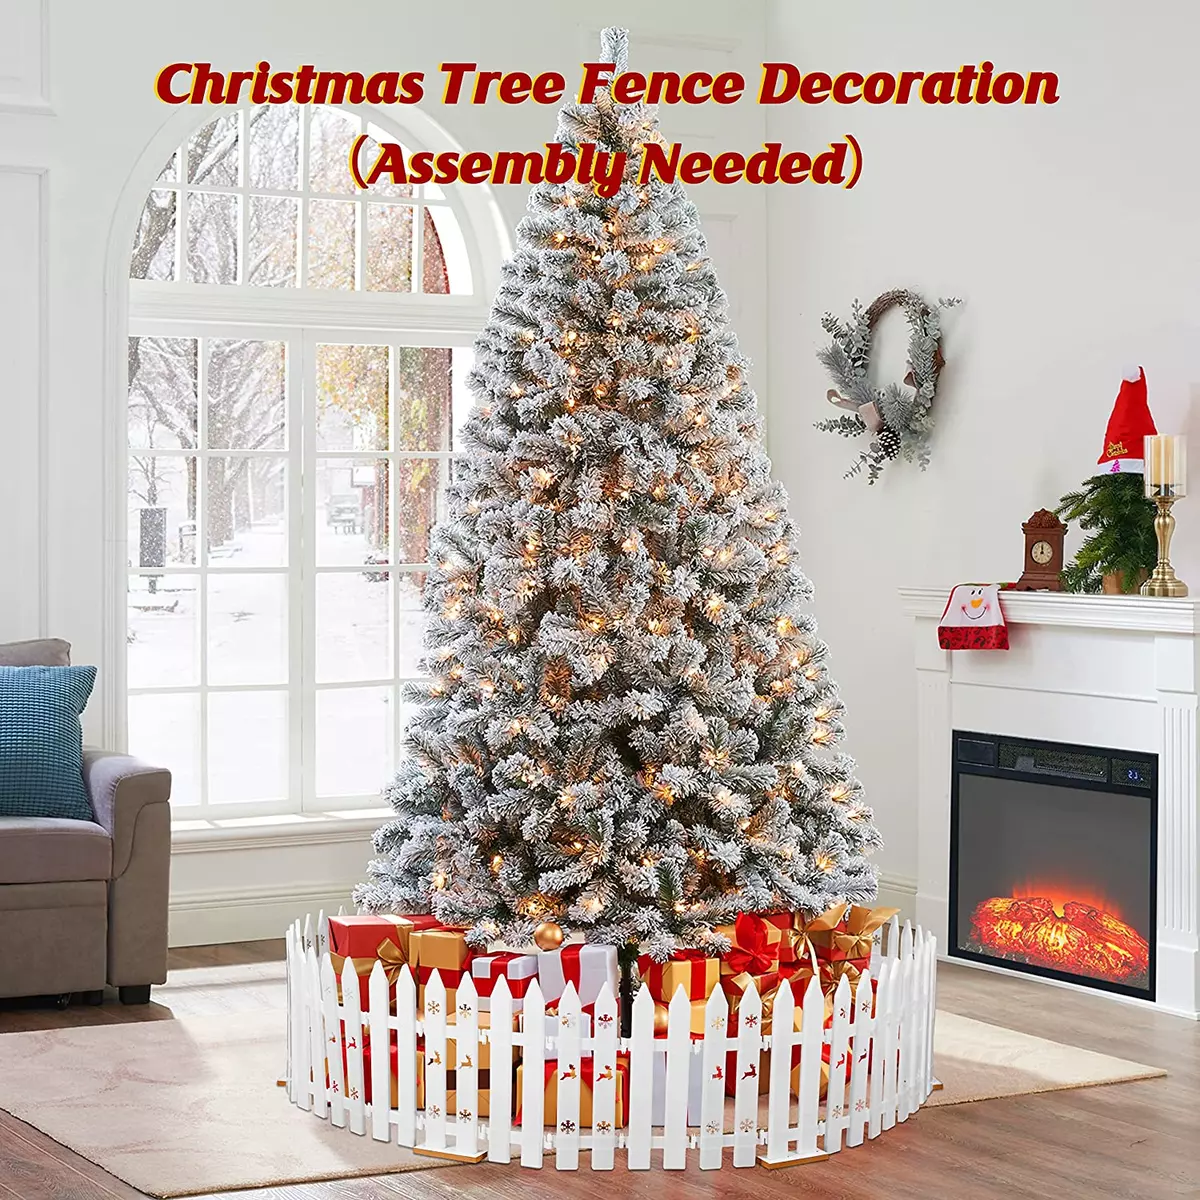 36PCS Christmas Tree Fence Decorations - Xmas Indoor Outdoor Gate for Pet Garden